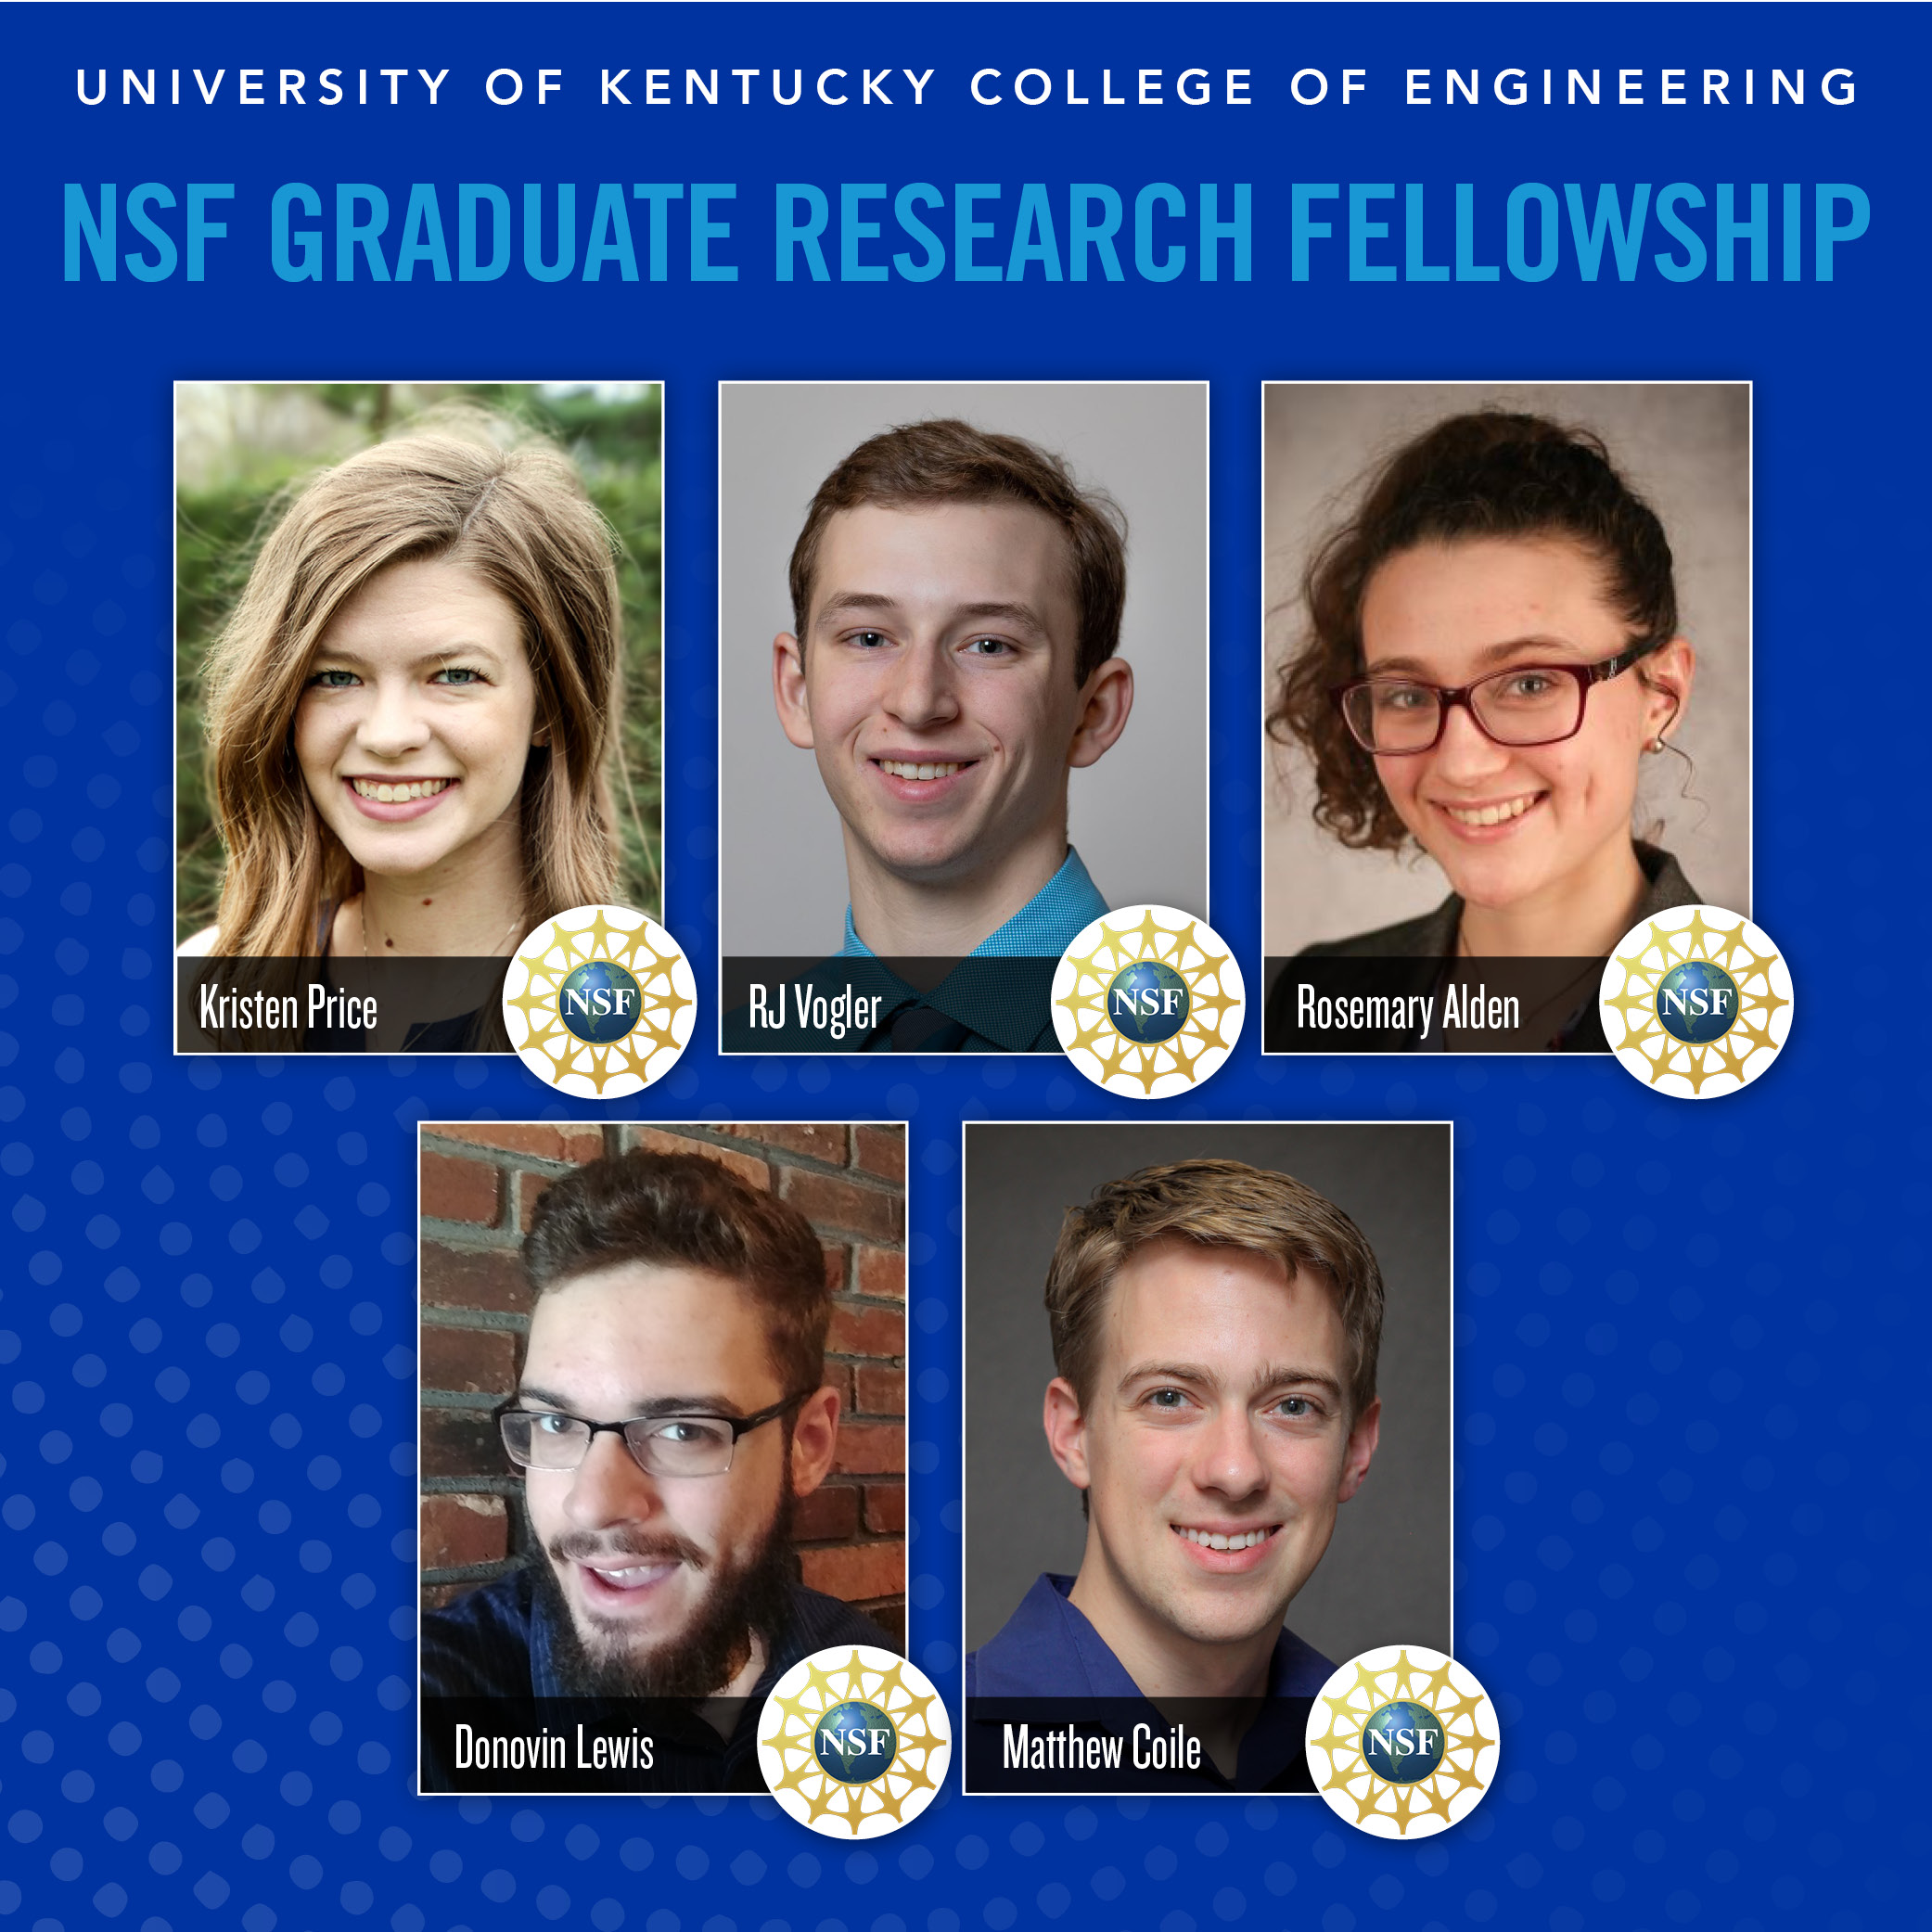 Five of UK's ten NSF Graduate Research Fellows are from the College of Engineering